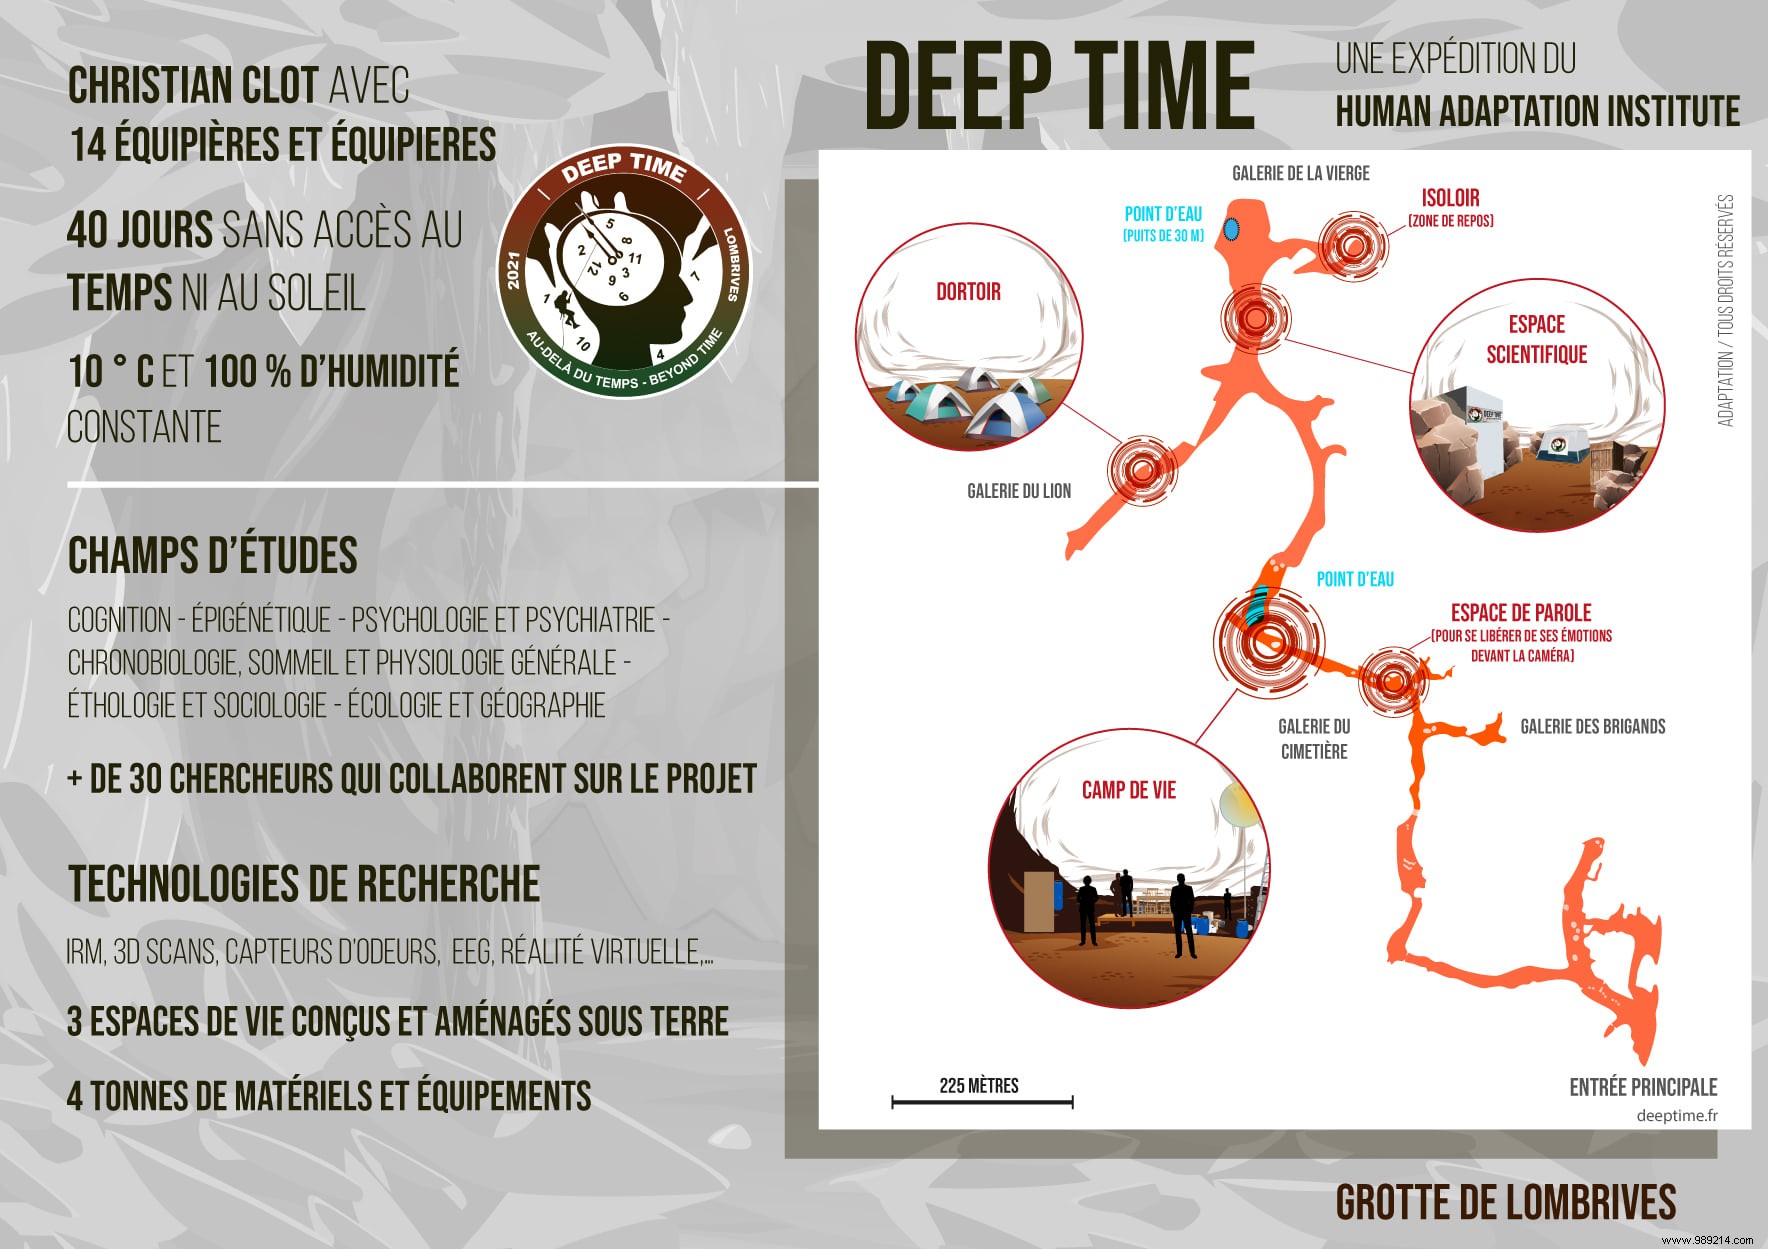 After 40 days in a cave, the  confined ones  of the Deep Time project are finally out! 